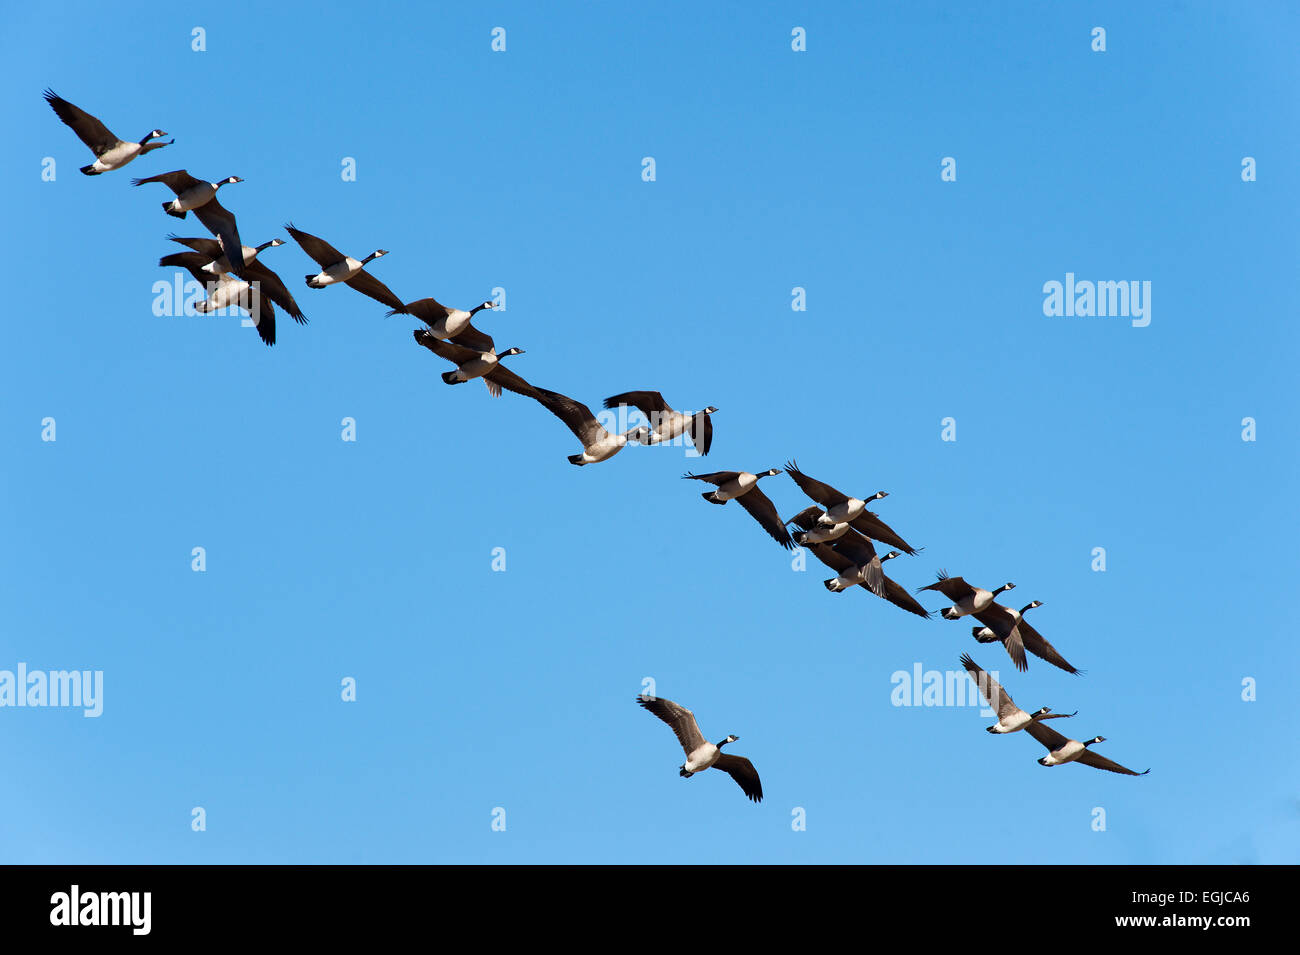 A flock of snow geese in the sky of Bosque Del Apache in New Mexico, USA Stock Photo